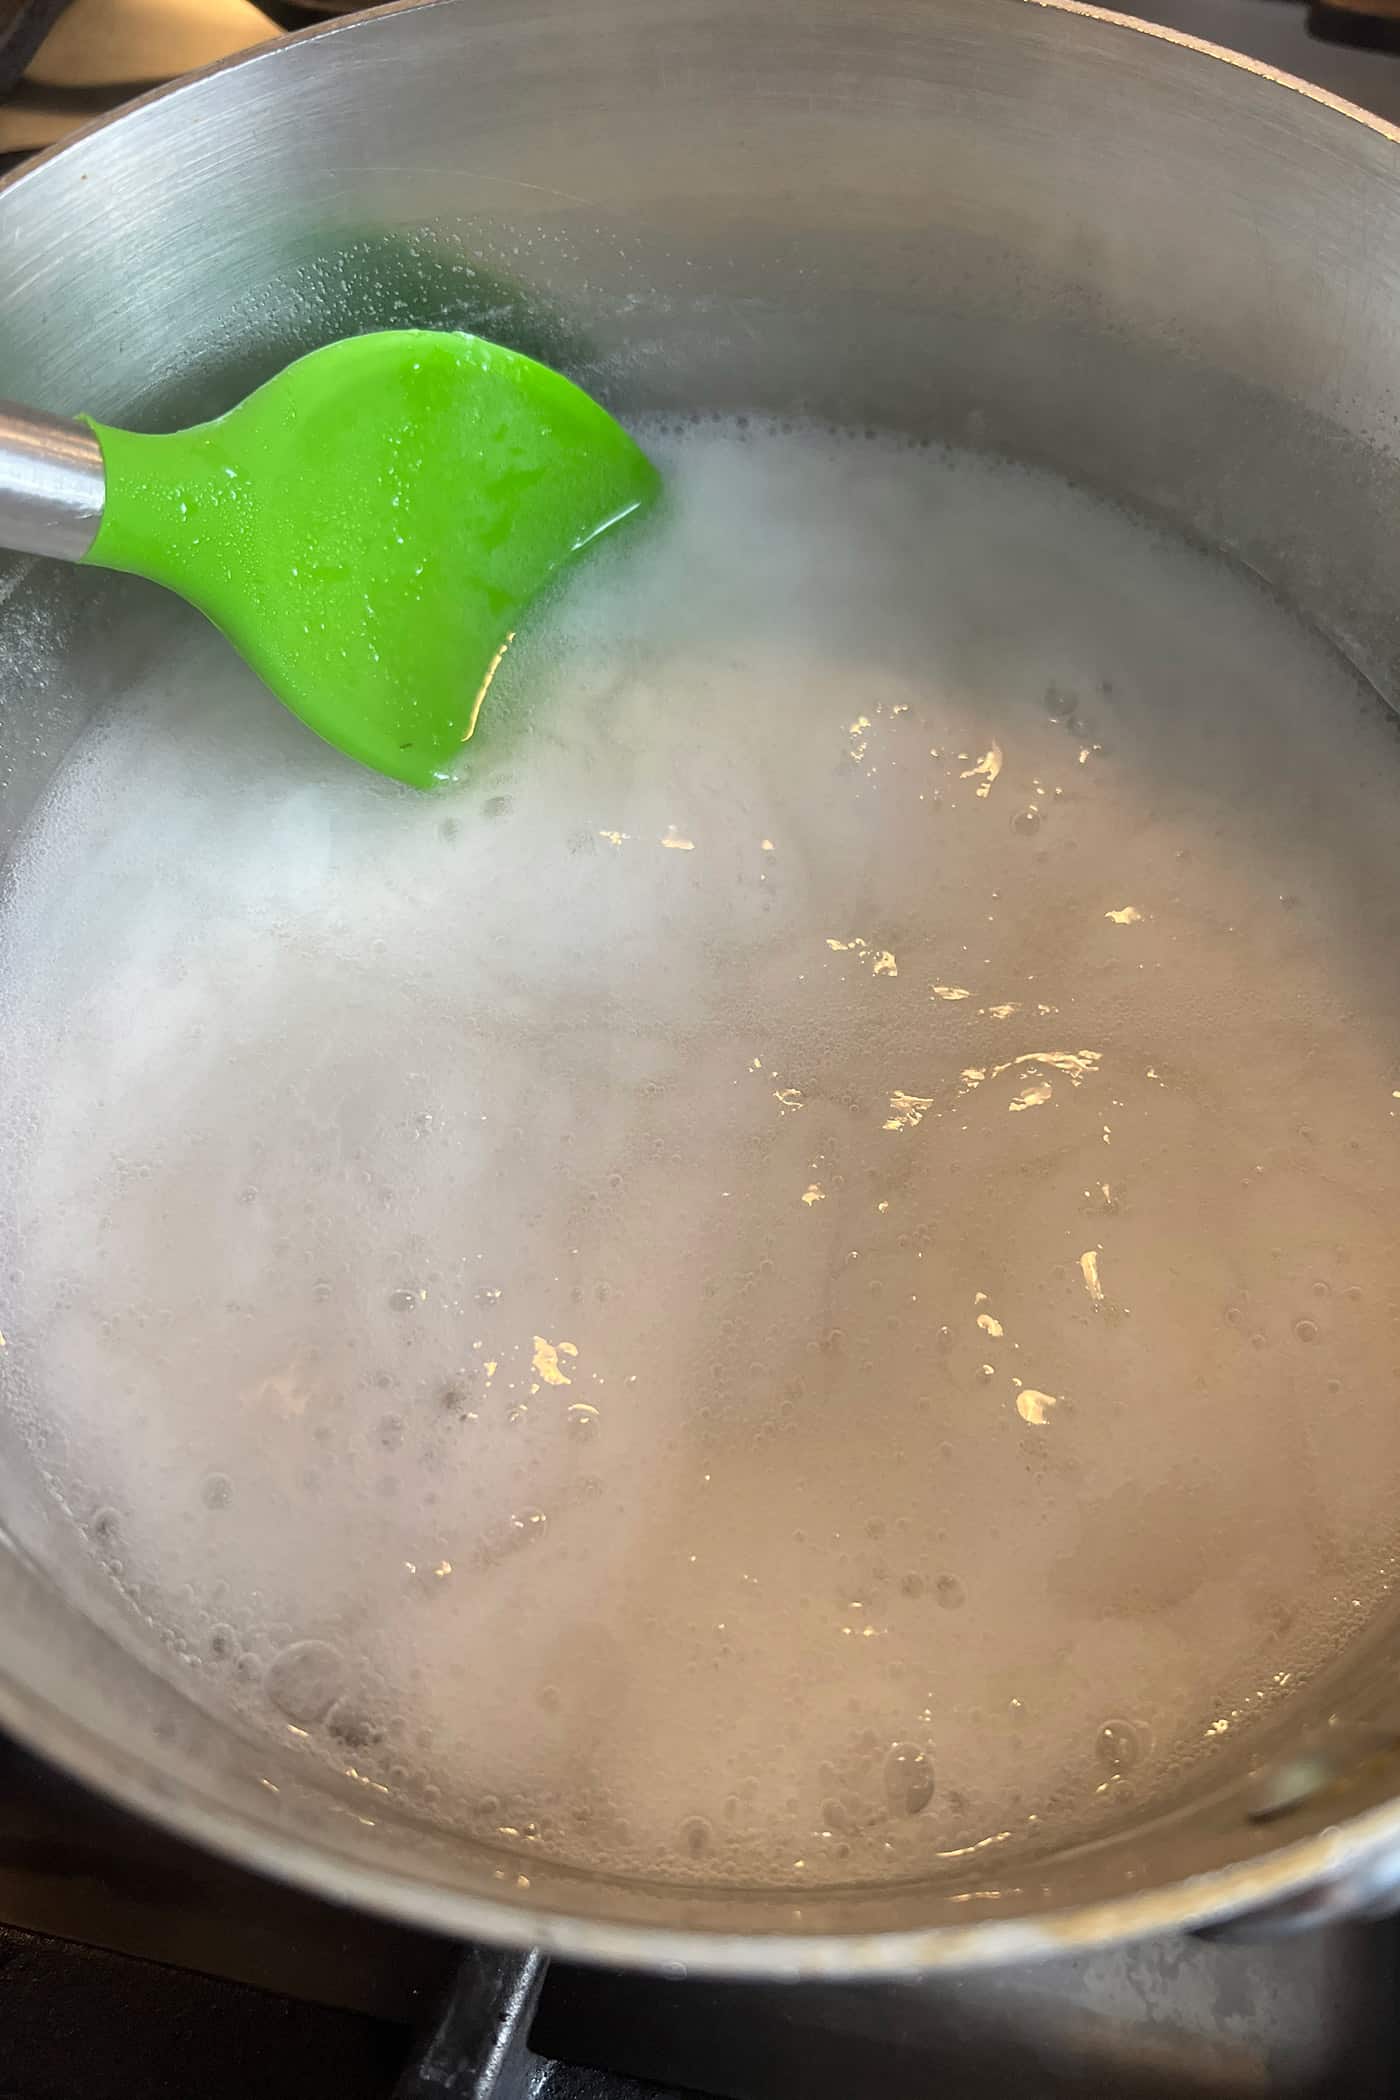 boiling the water and pectin mixture